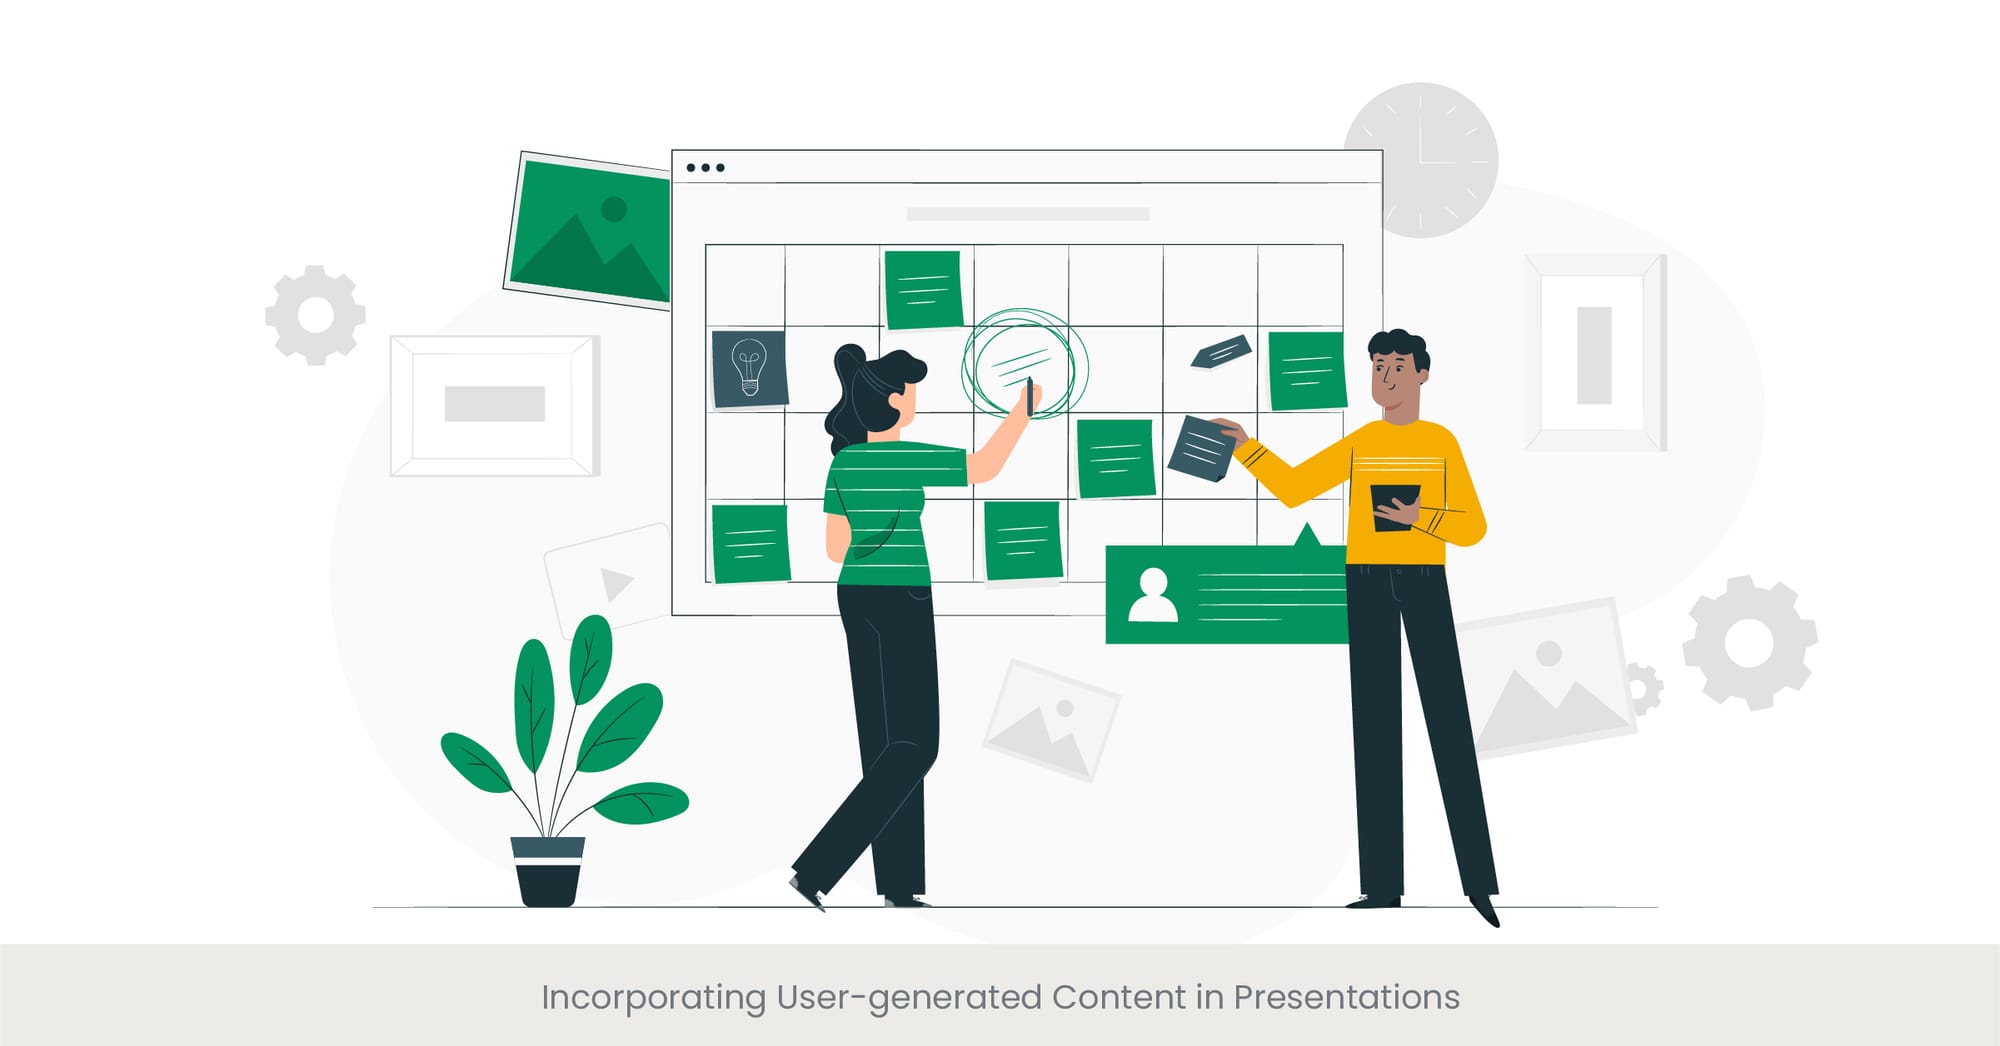 Incorporating User-generated Content in Presentations